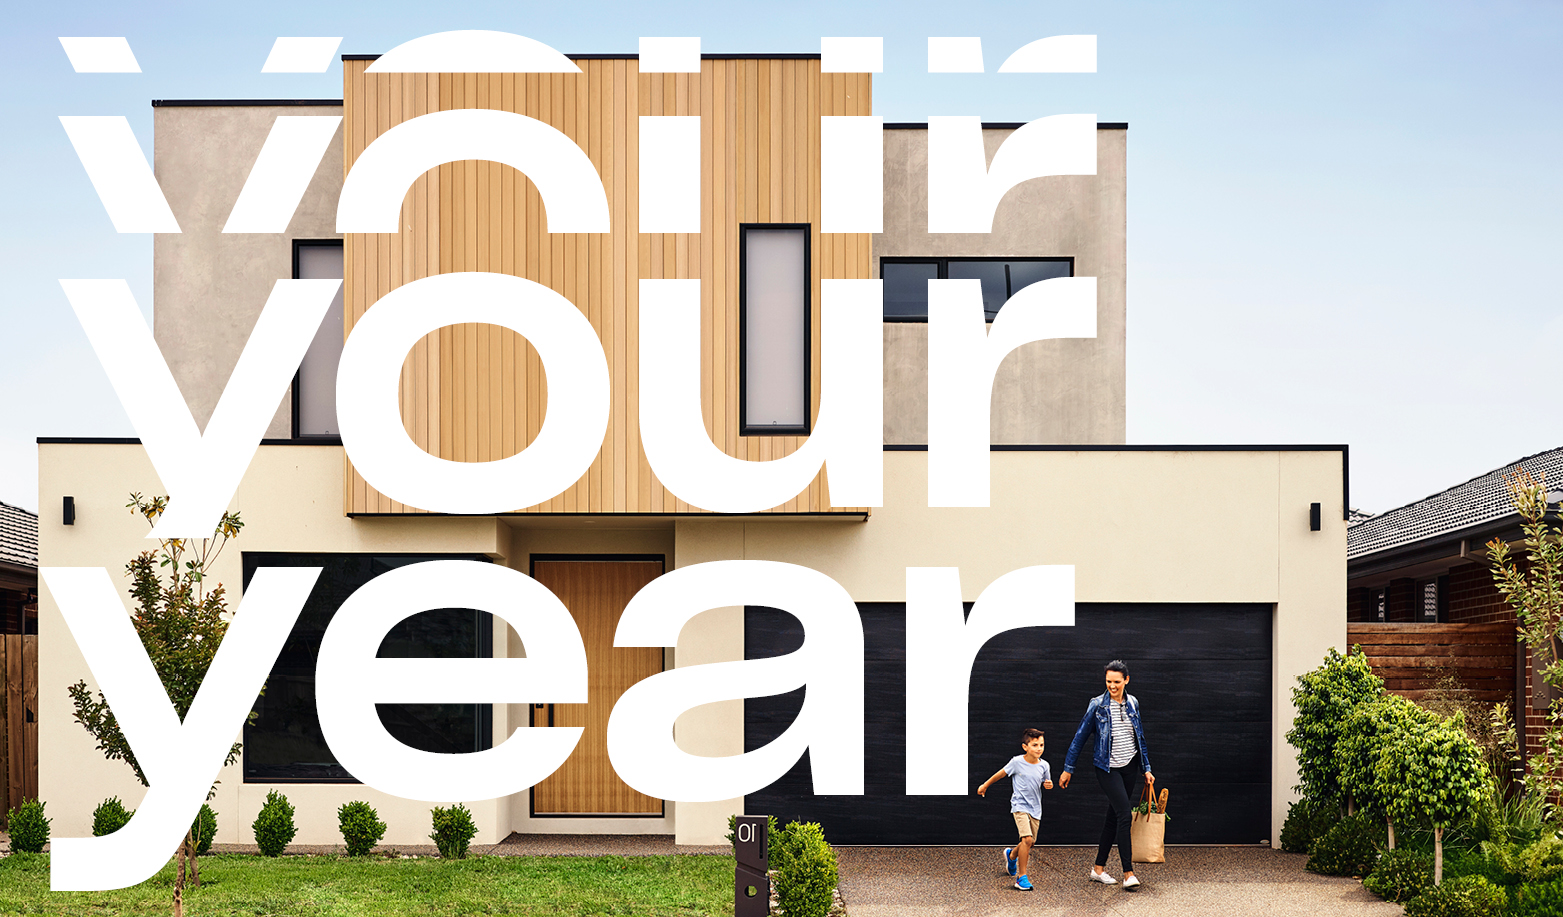 Your year to have it all at Woodlea